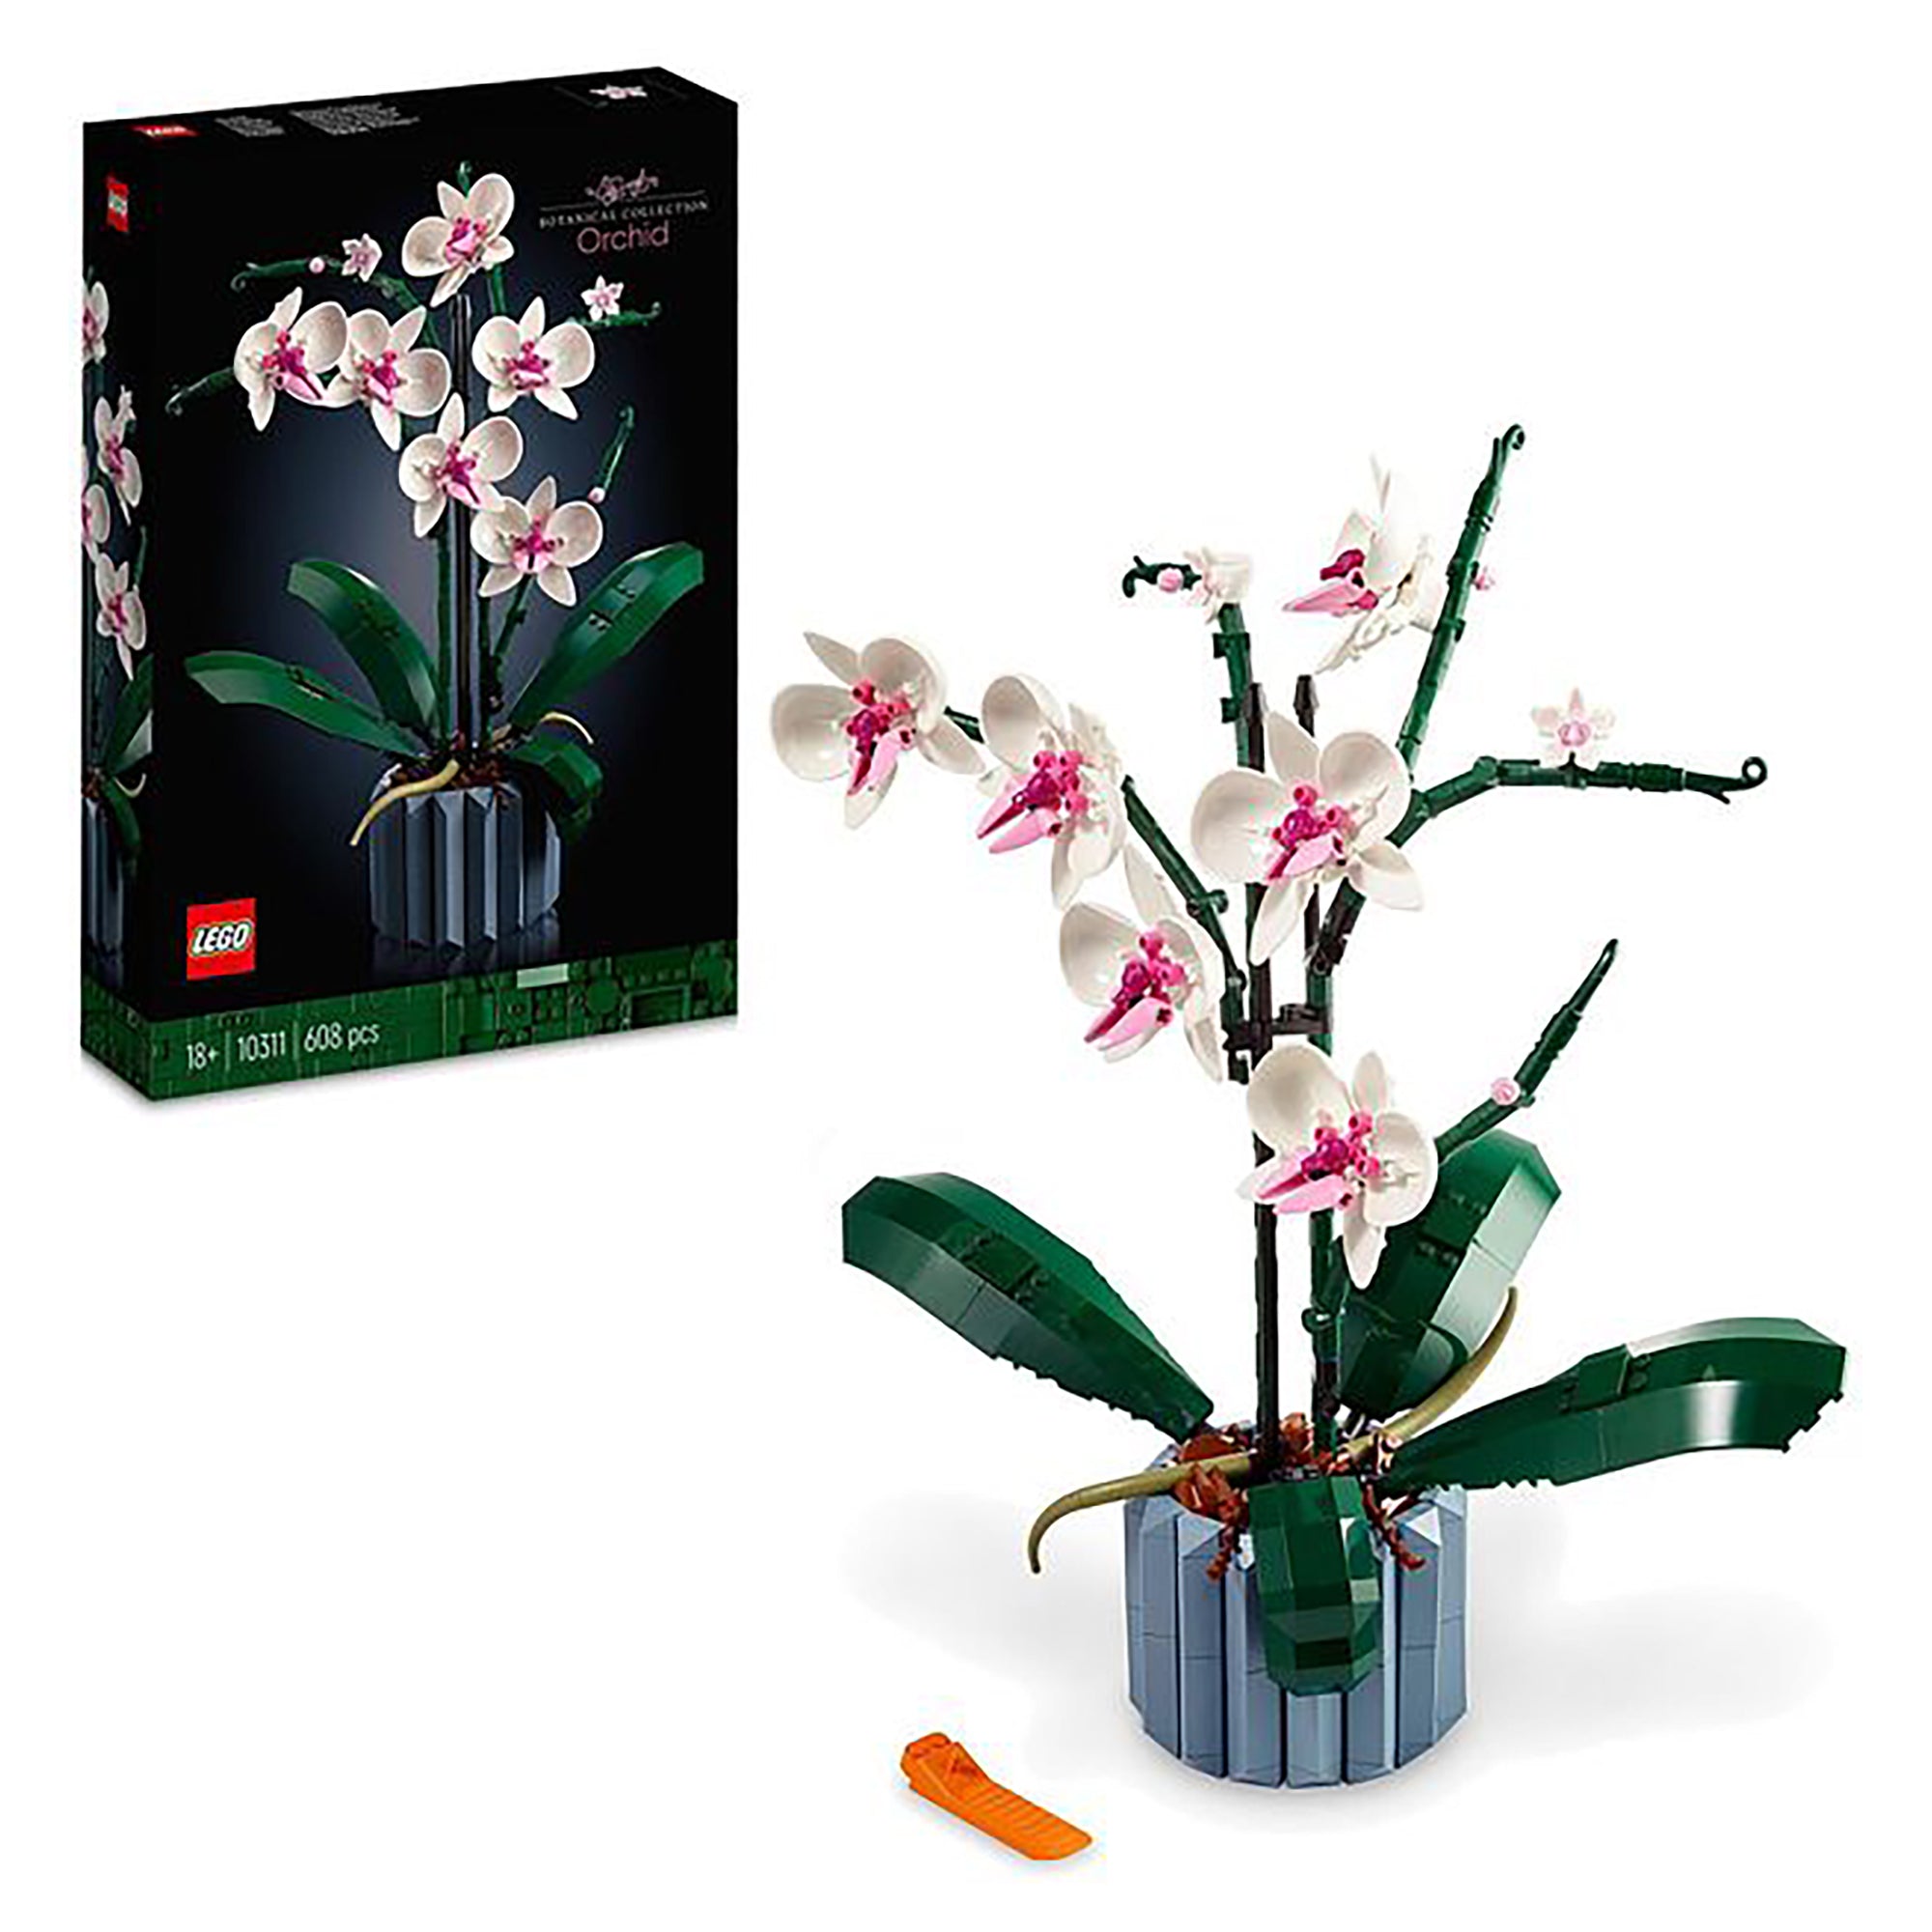 LEGO Icons Botanical Orchid 10311 (608 pieces)